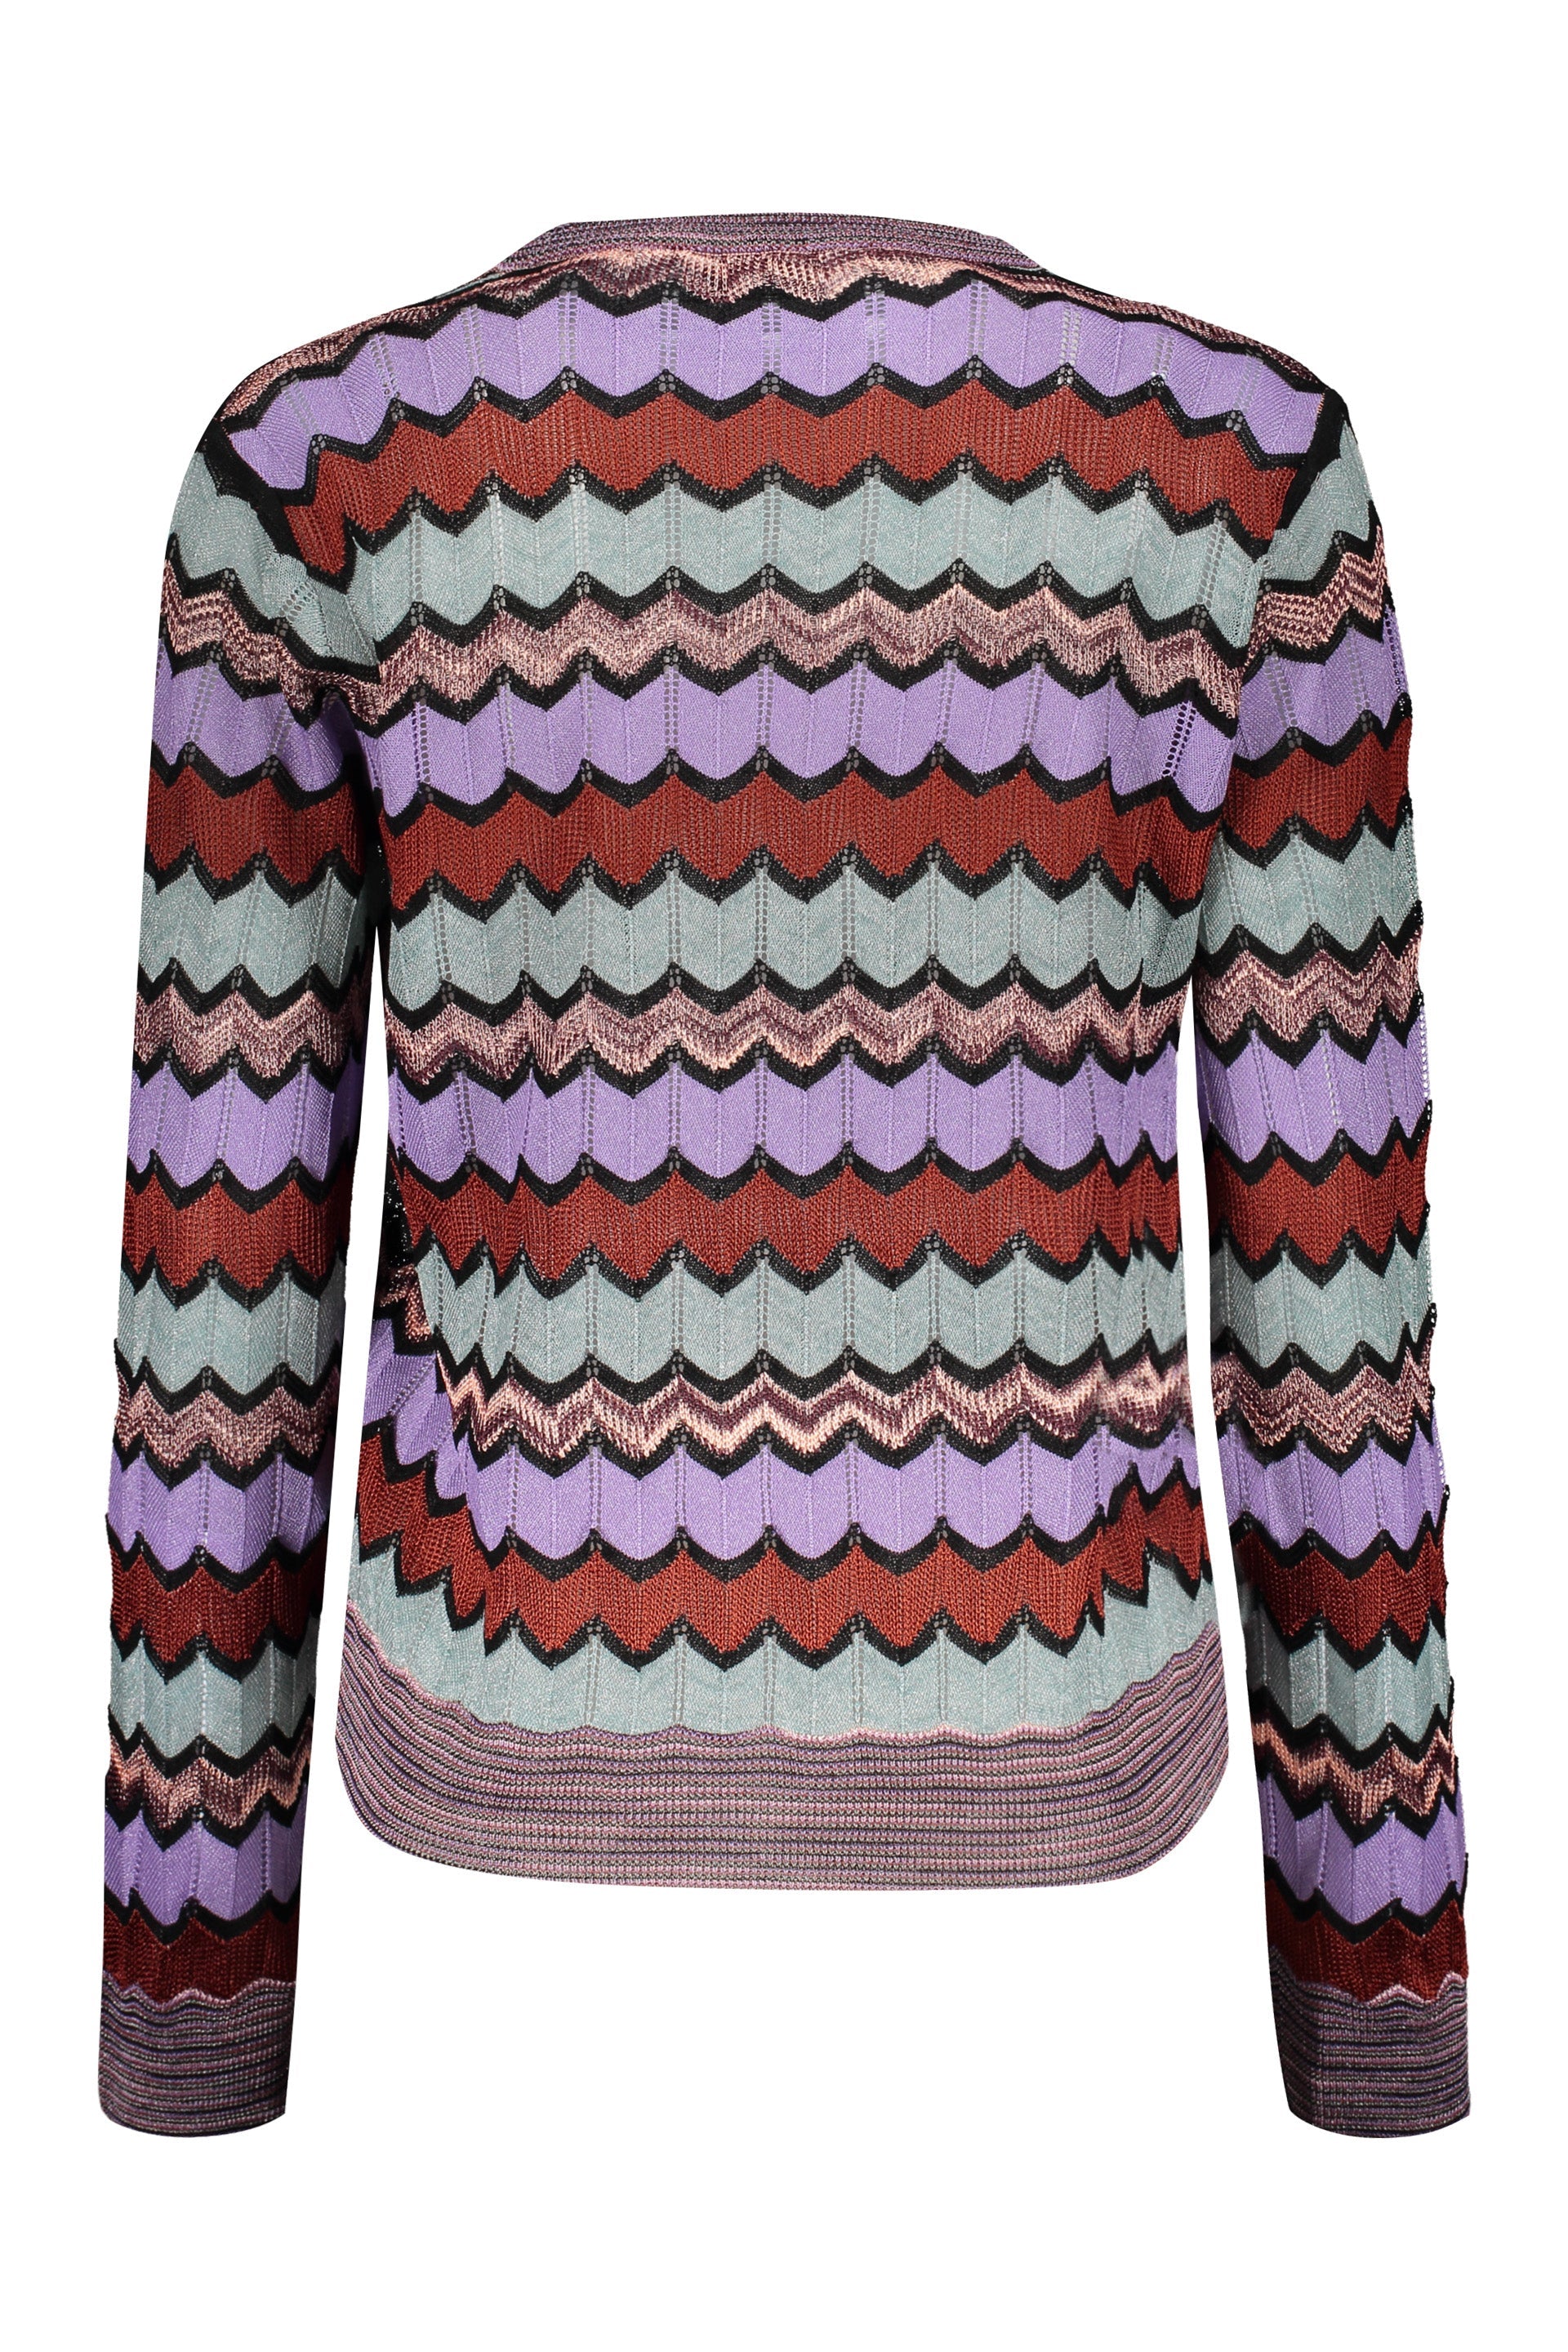 Missoni-OUTLET-SALE-Long-sleeve-crew-neck-sweater-Strick-ARCHIVE-COLLECTION-2_f4a9caa0-ab25-4193-9b08-105ca21c4b4e.jpg